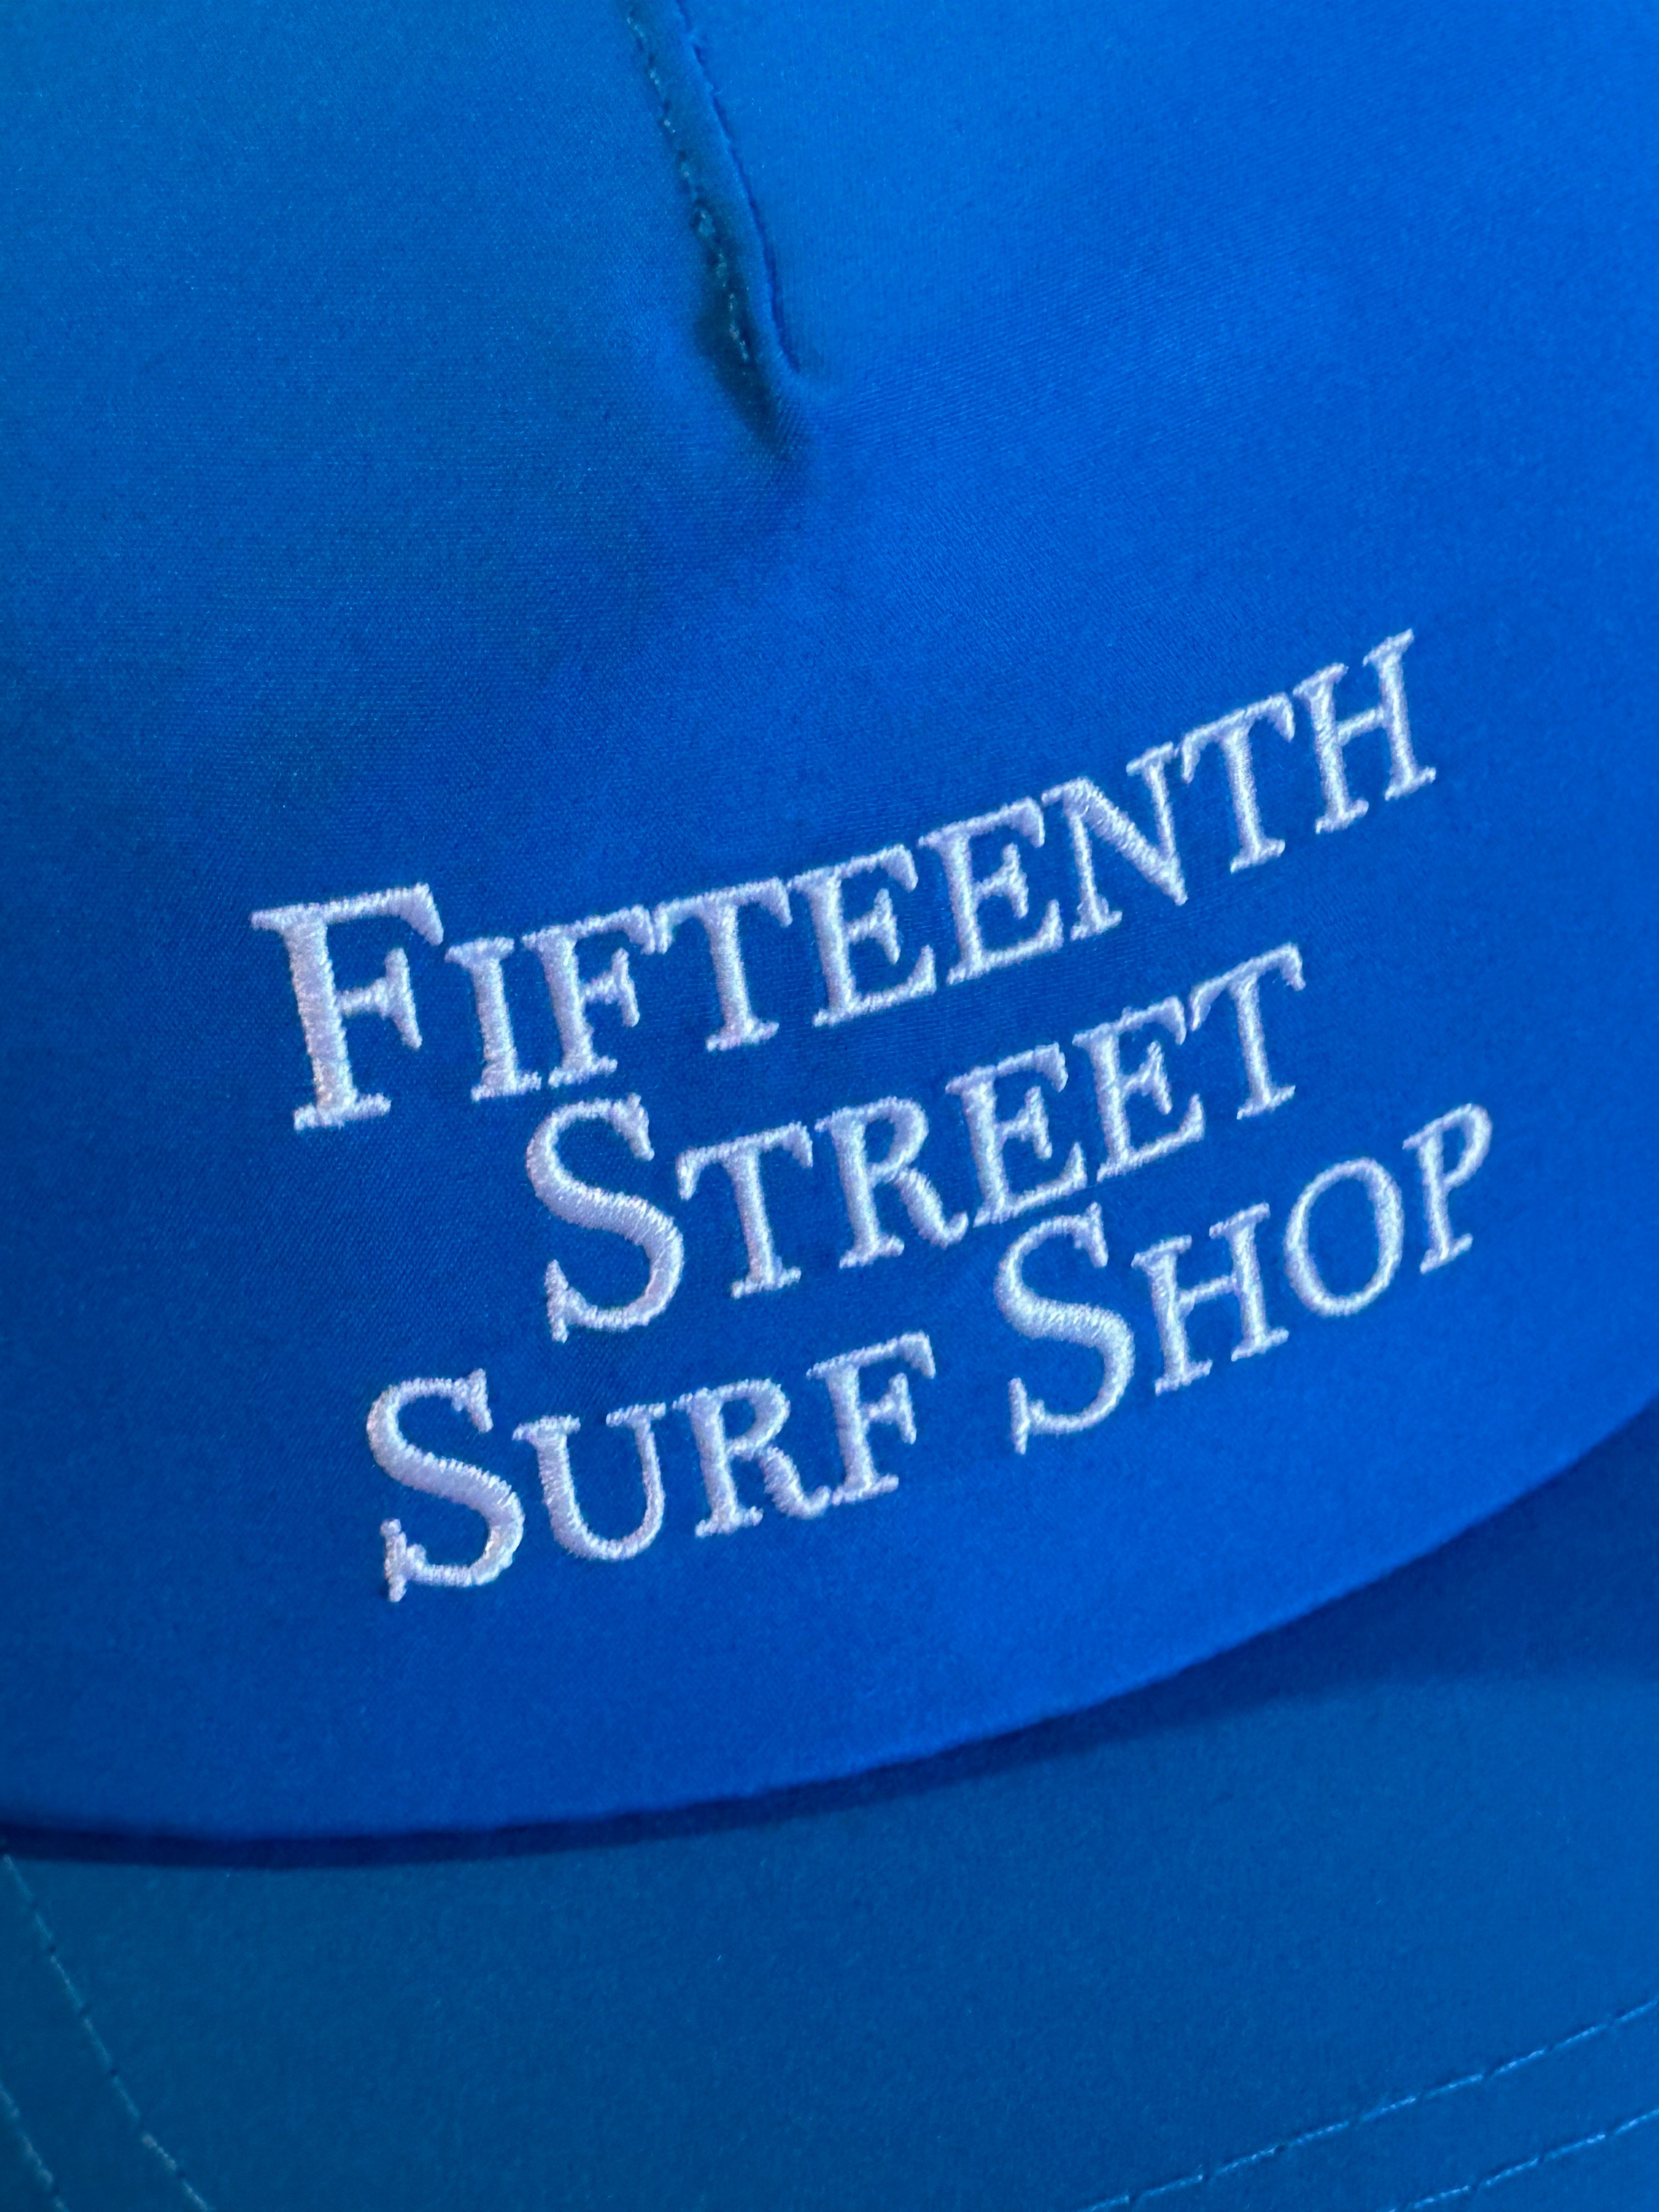 15th St Surf Shop Typeset Embroidered Adult Hat VARIOUS COLORS